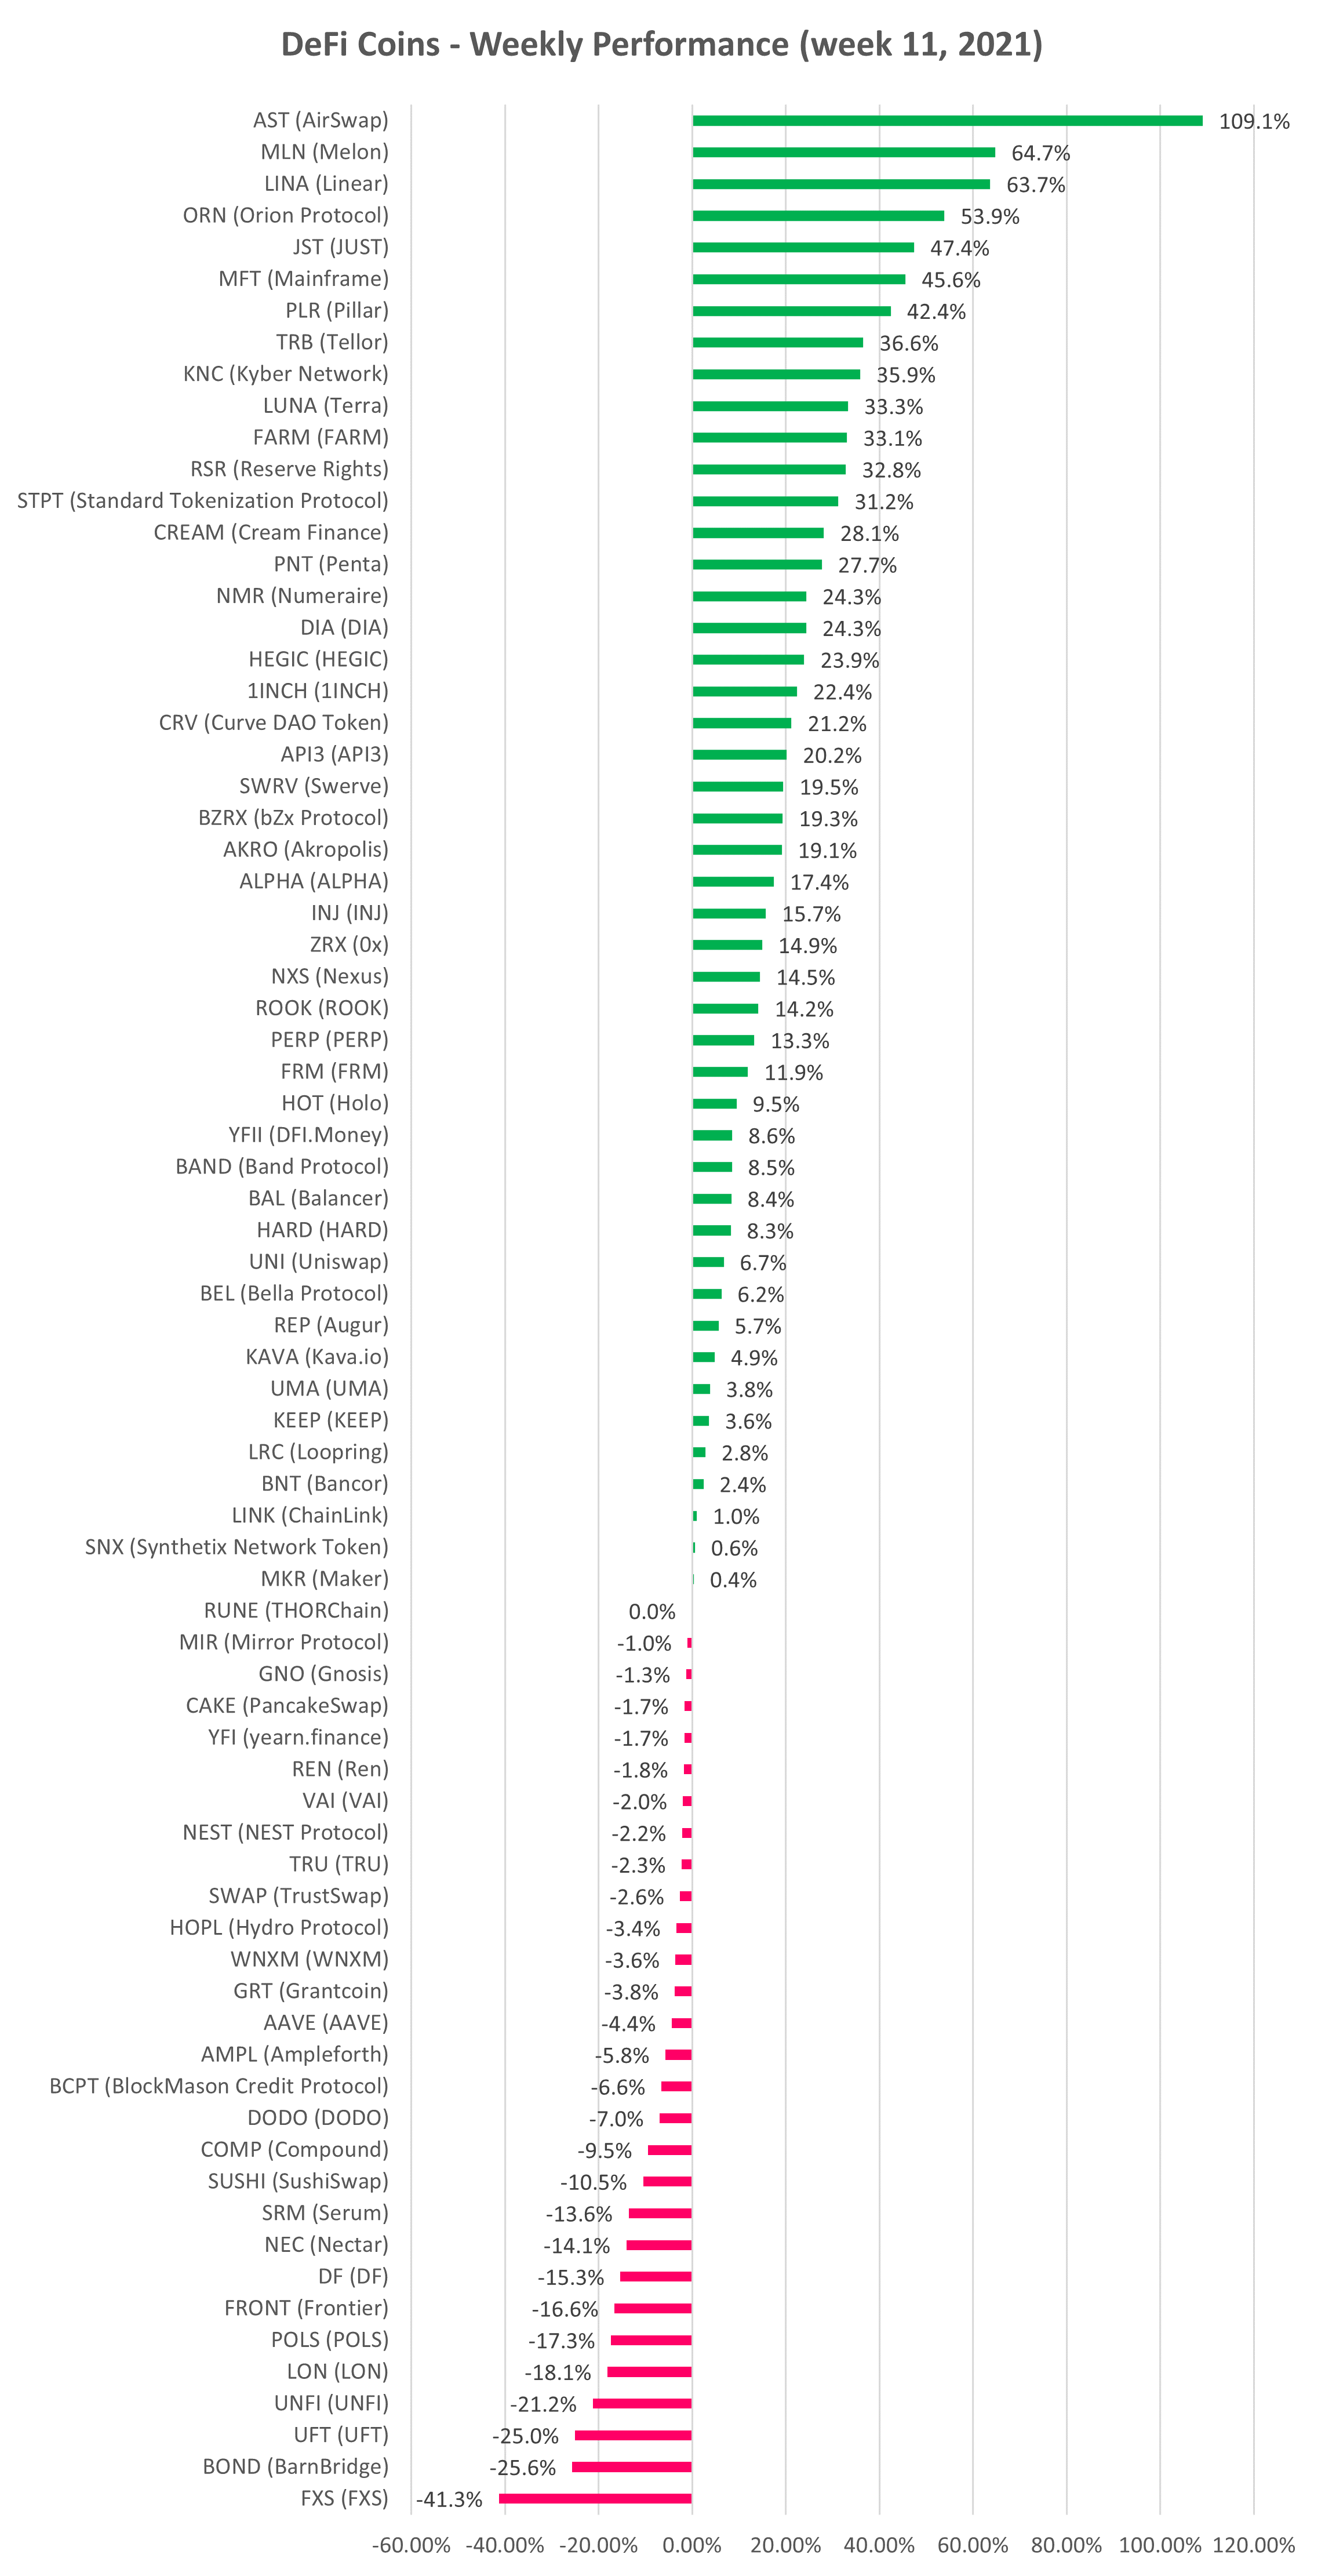 DeFi cryptocurrency weekly performance